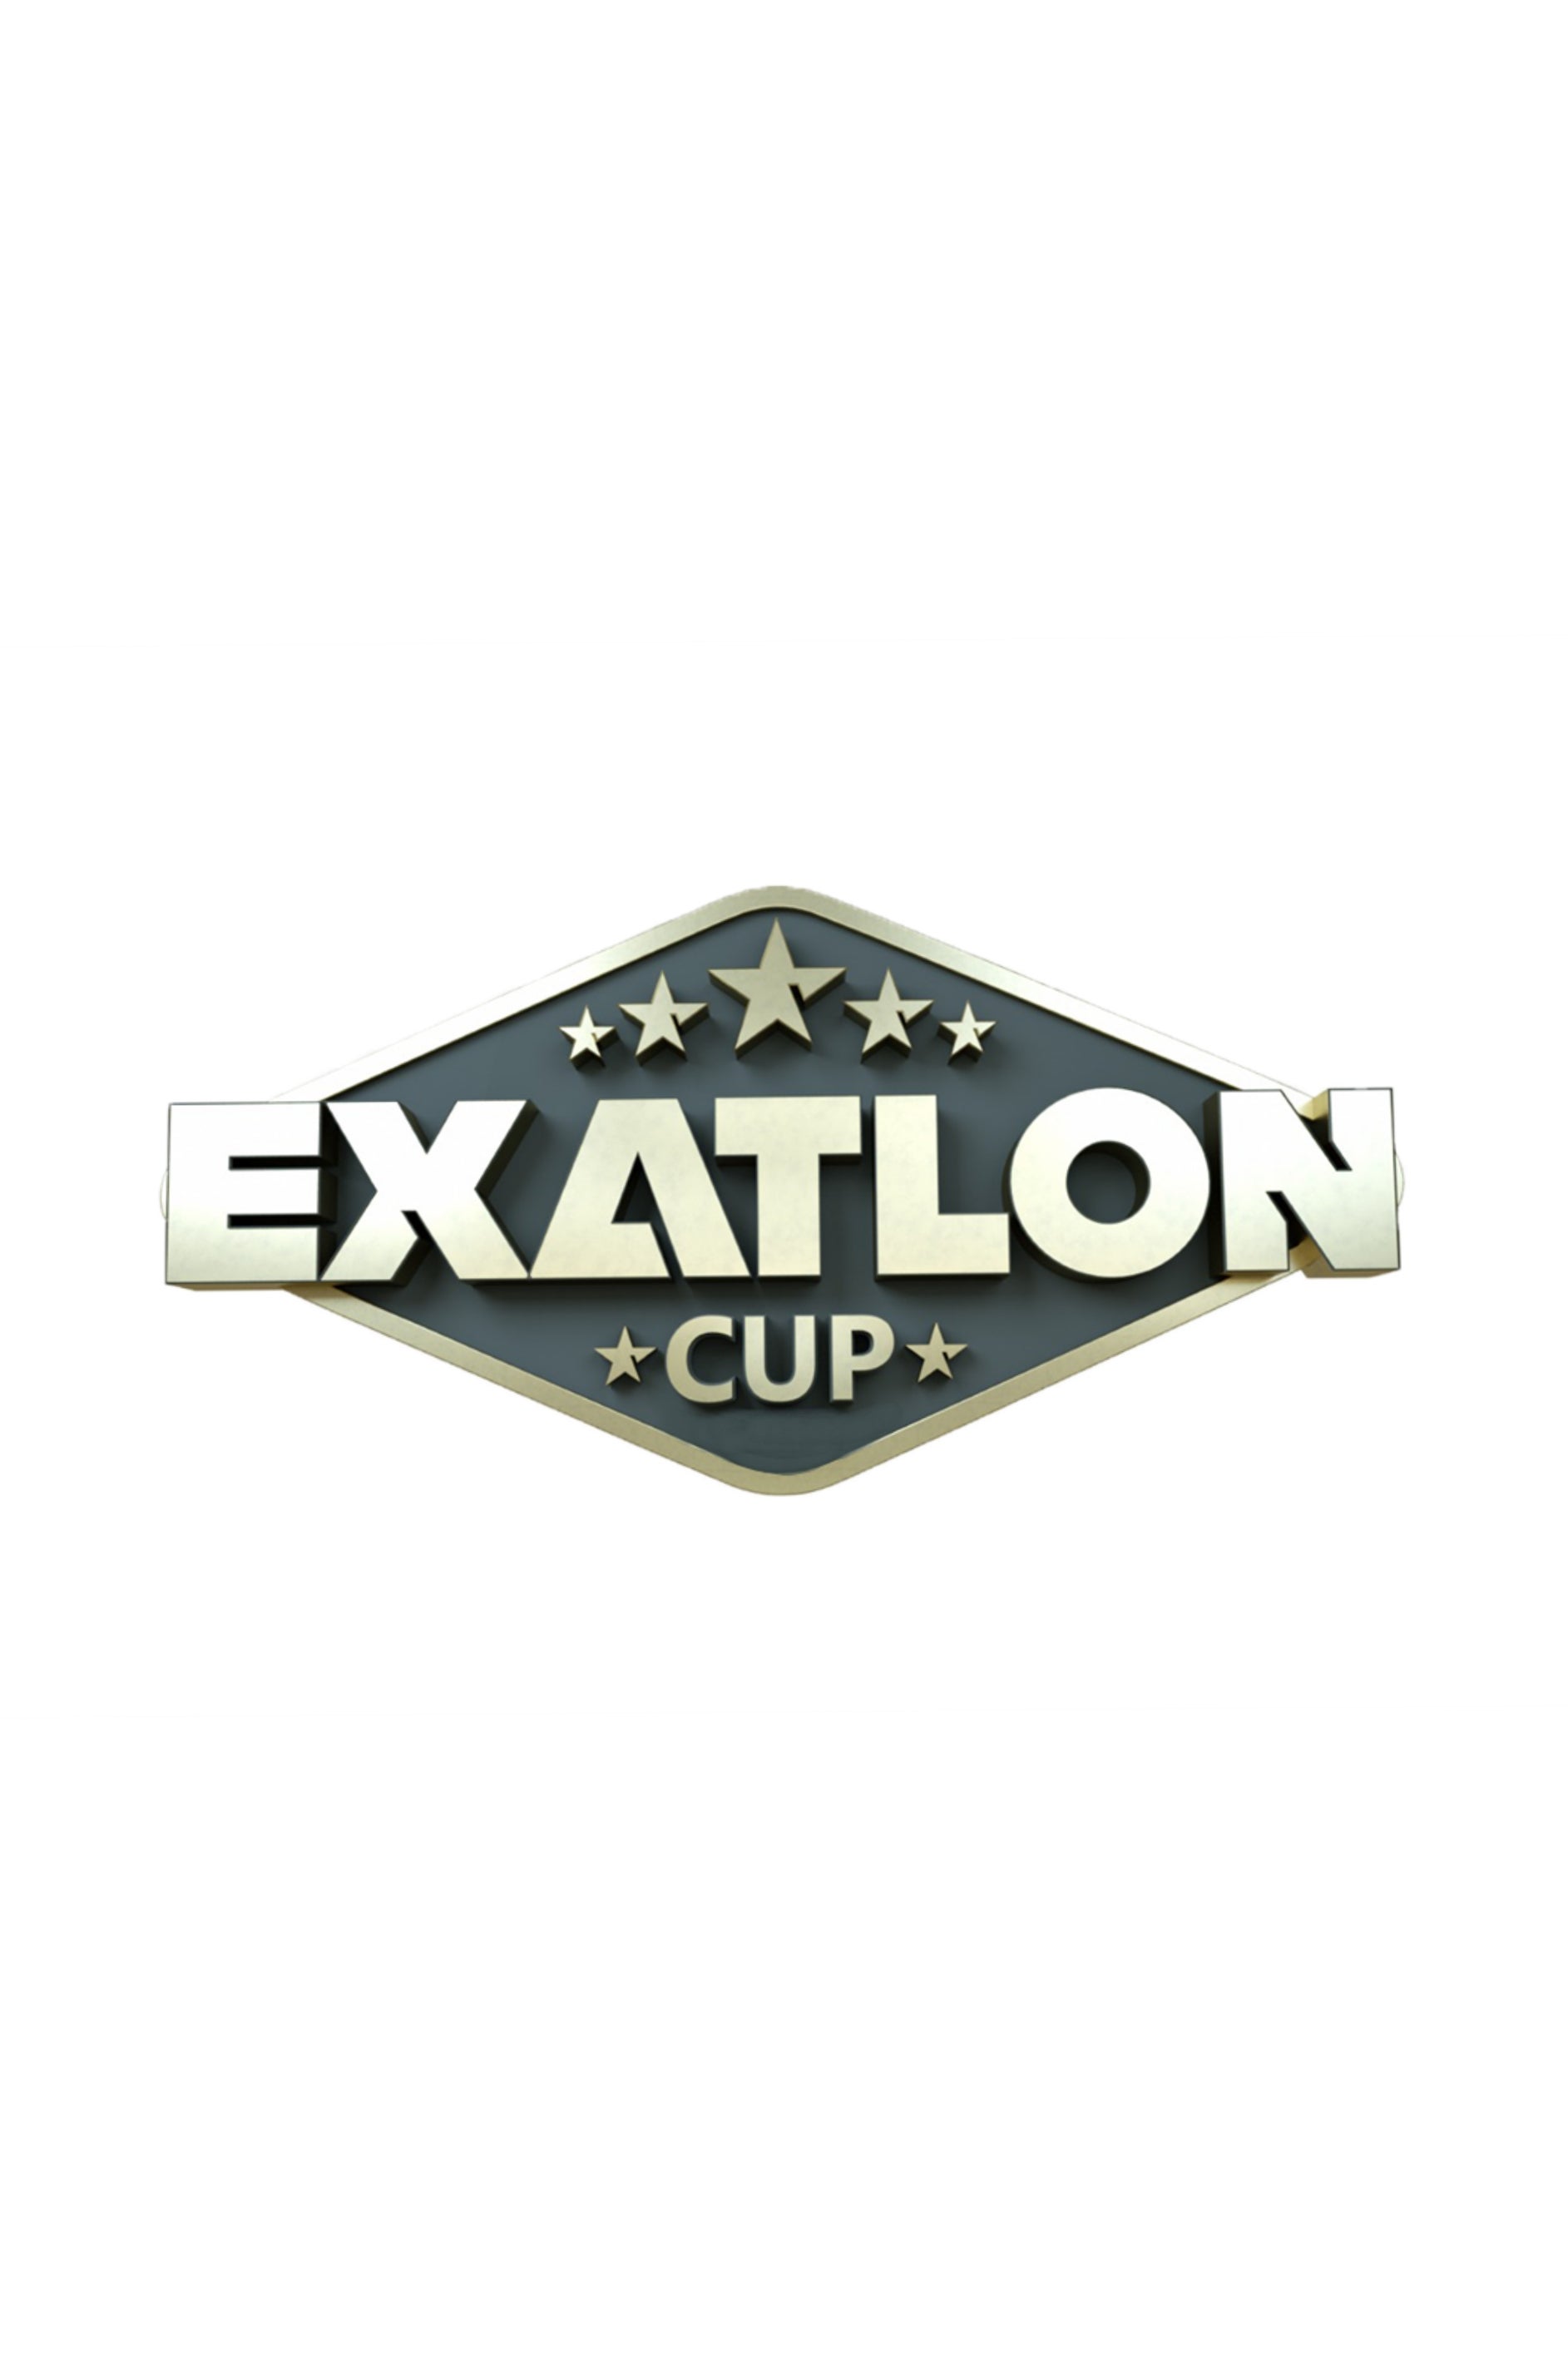 TV ratings for Exatlon Cup in Argentina. Acunn Internet TV series